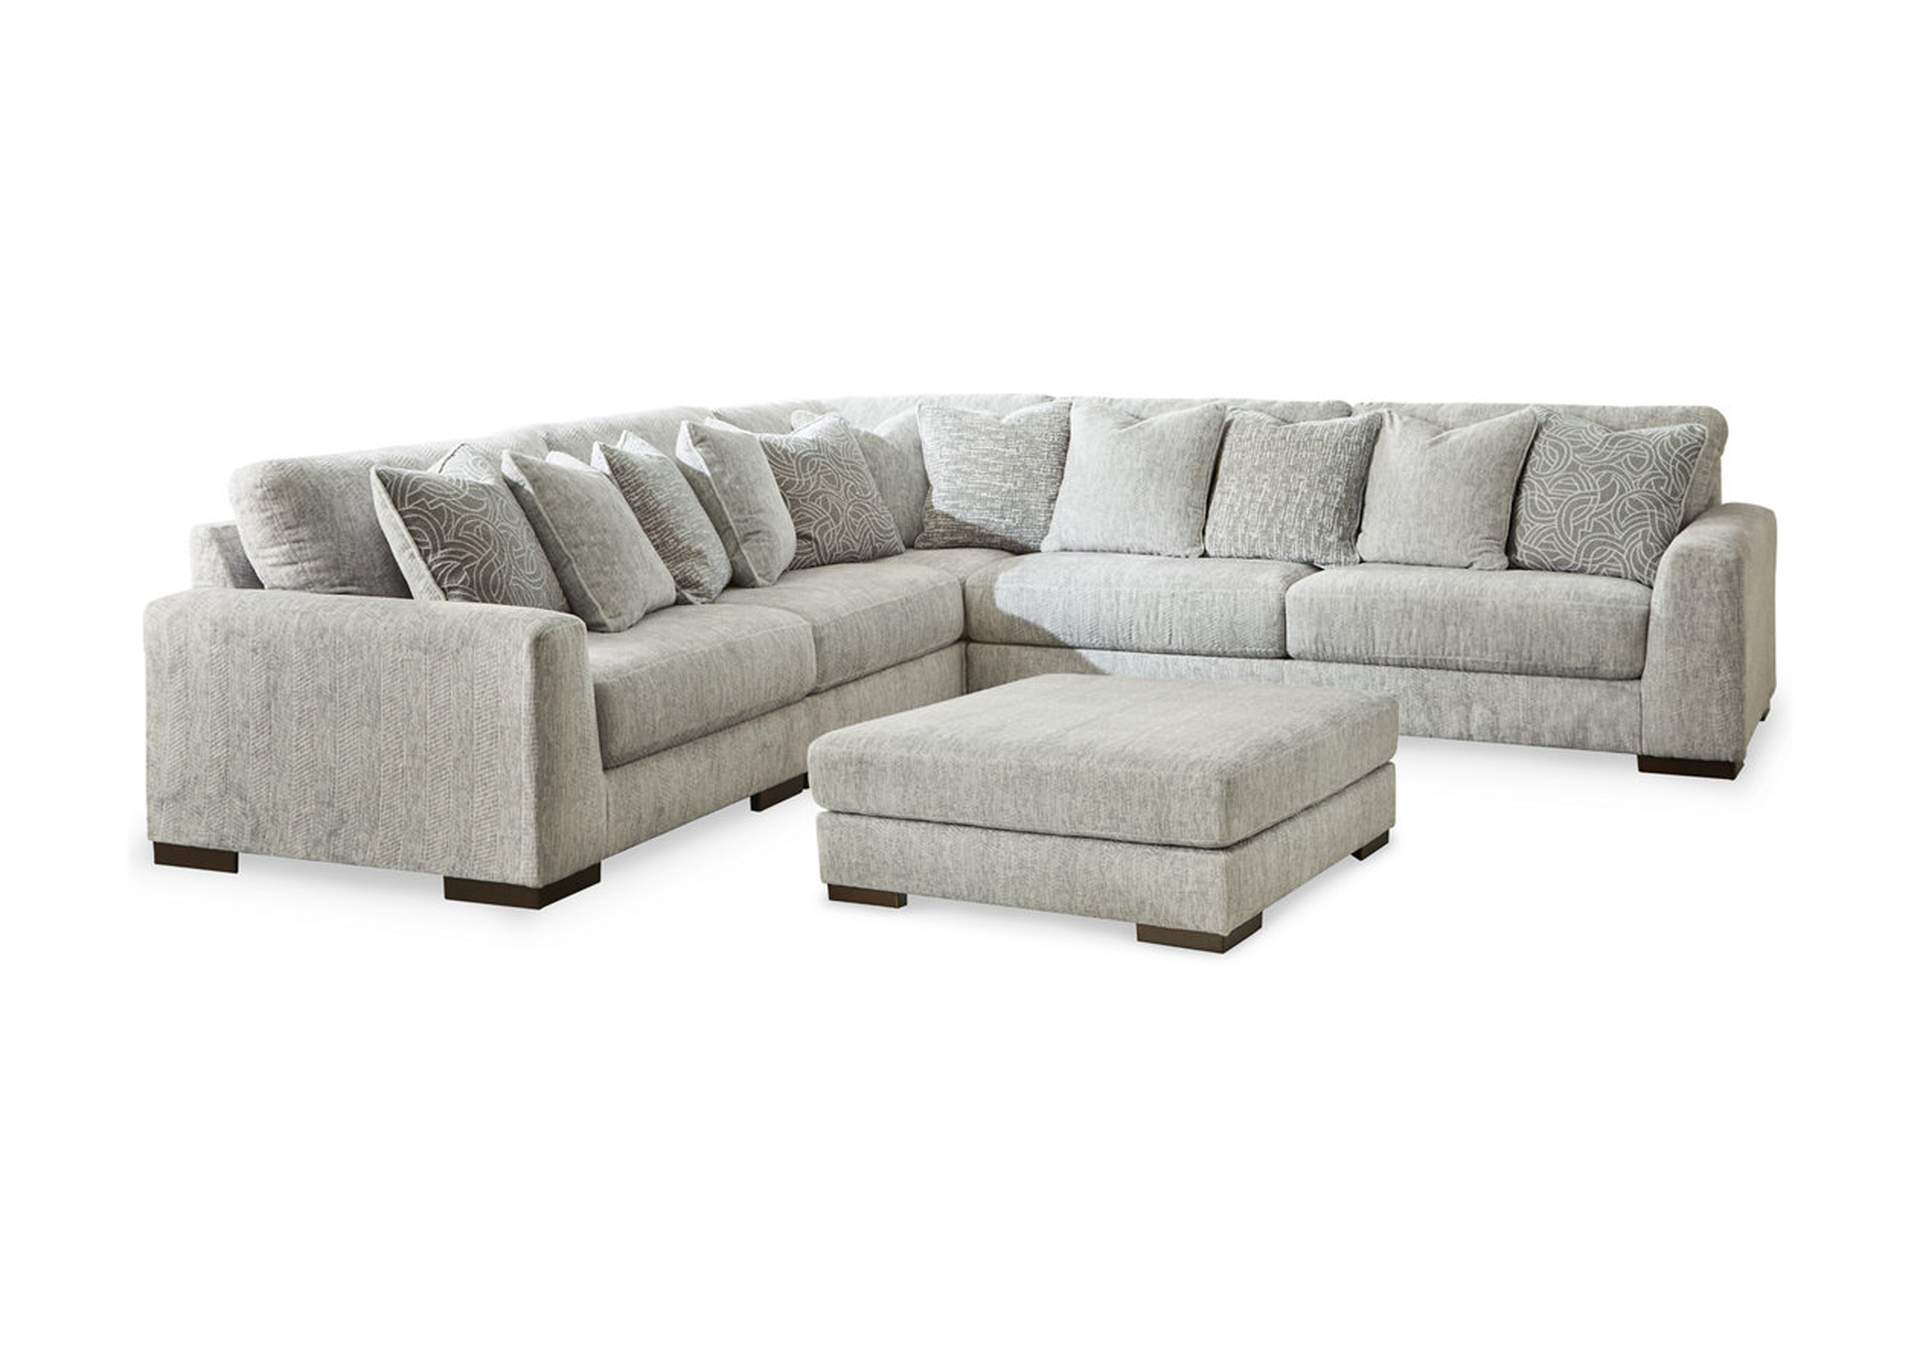 Regent Park 5-Piece Sectional with Ottoman,Signature Design By Ashley